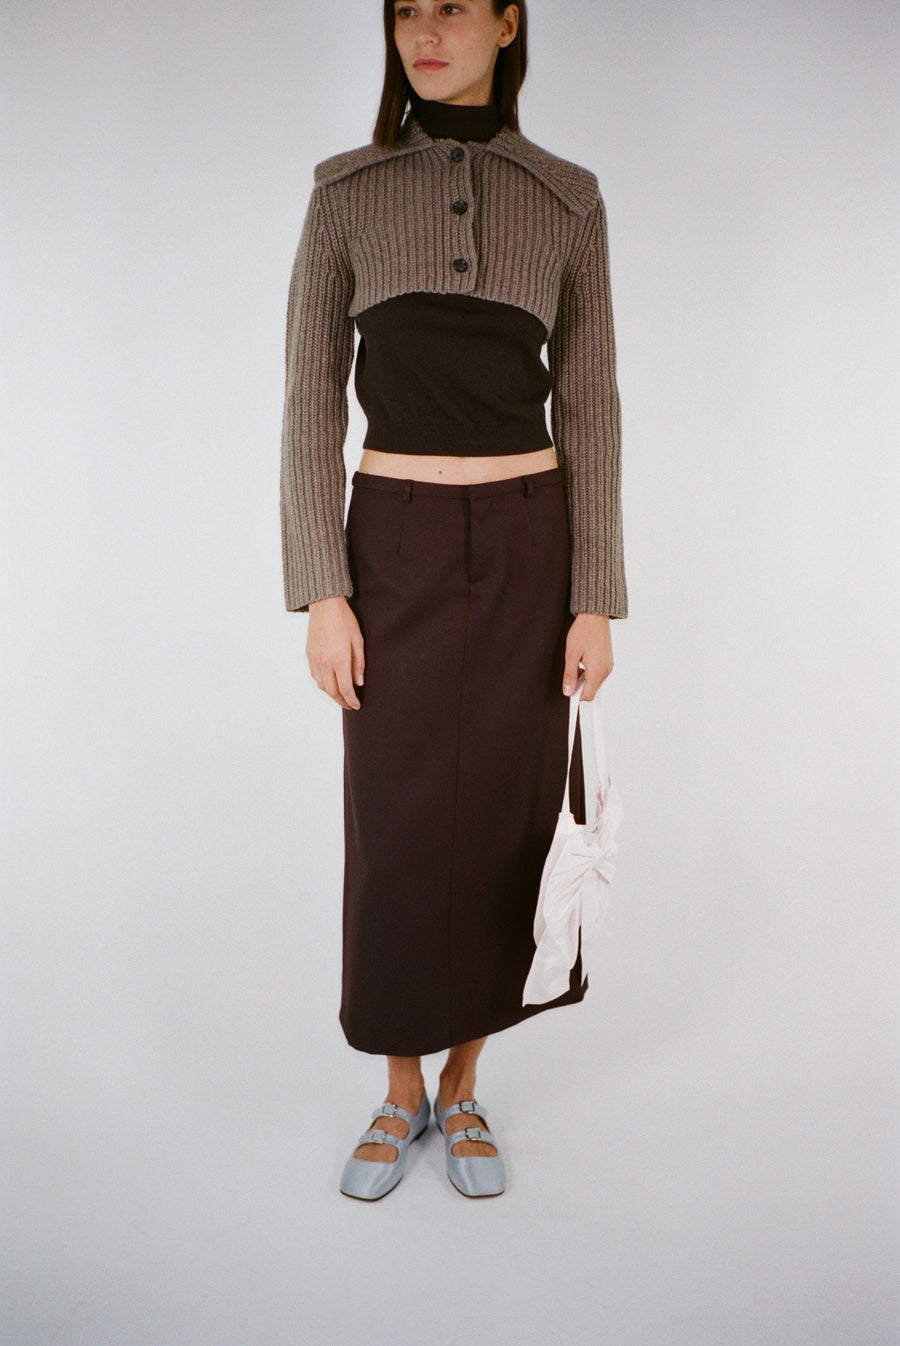 Cropped cardigan sweater in hojicha brown with button closure on model